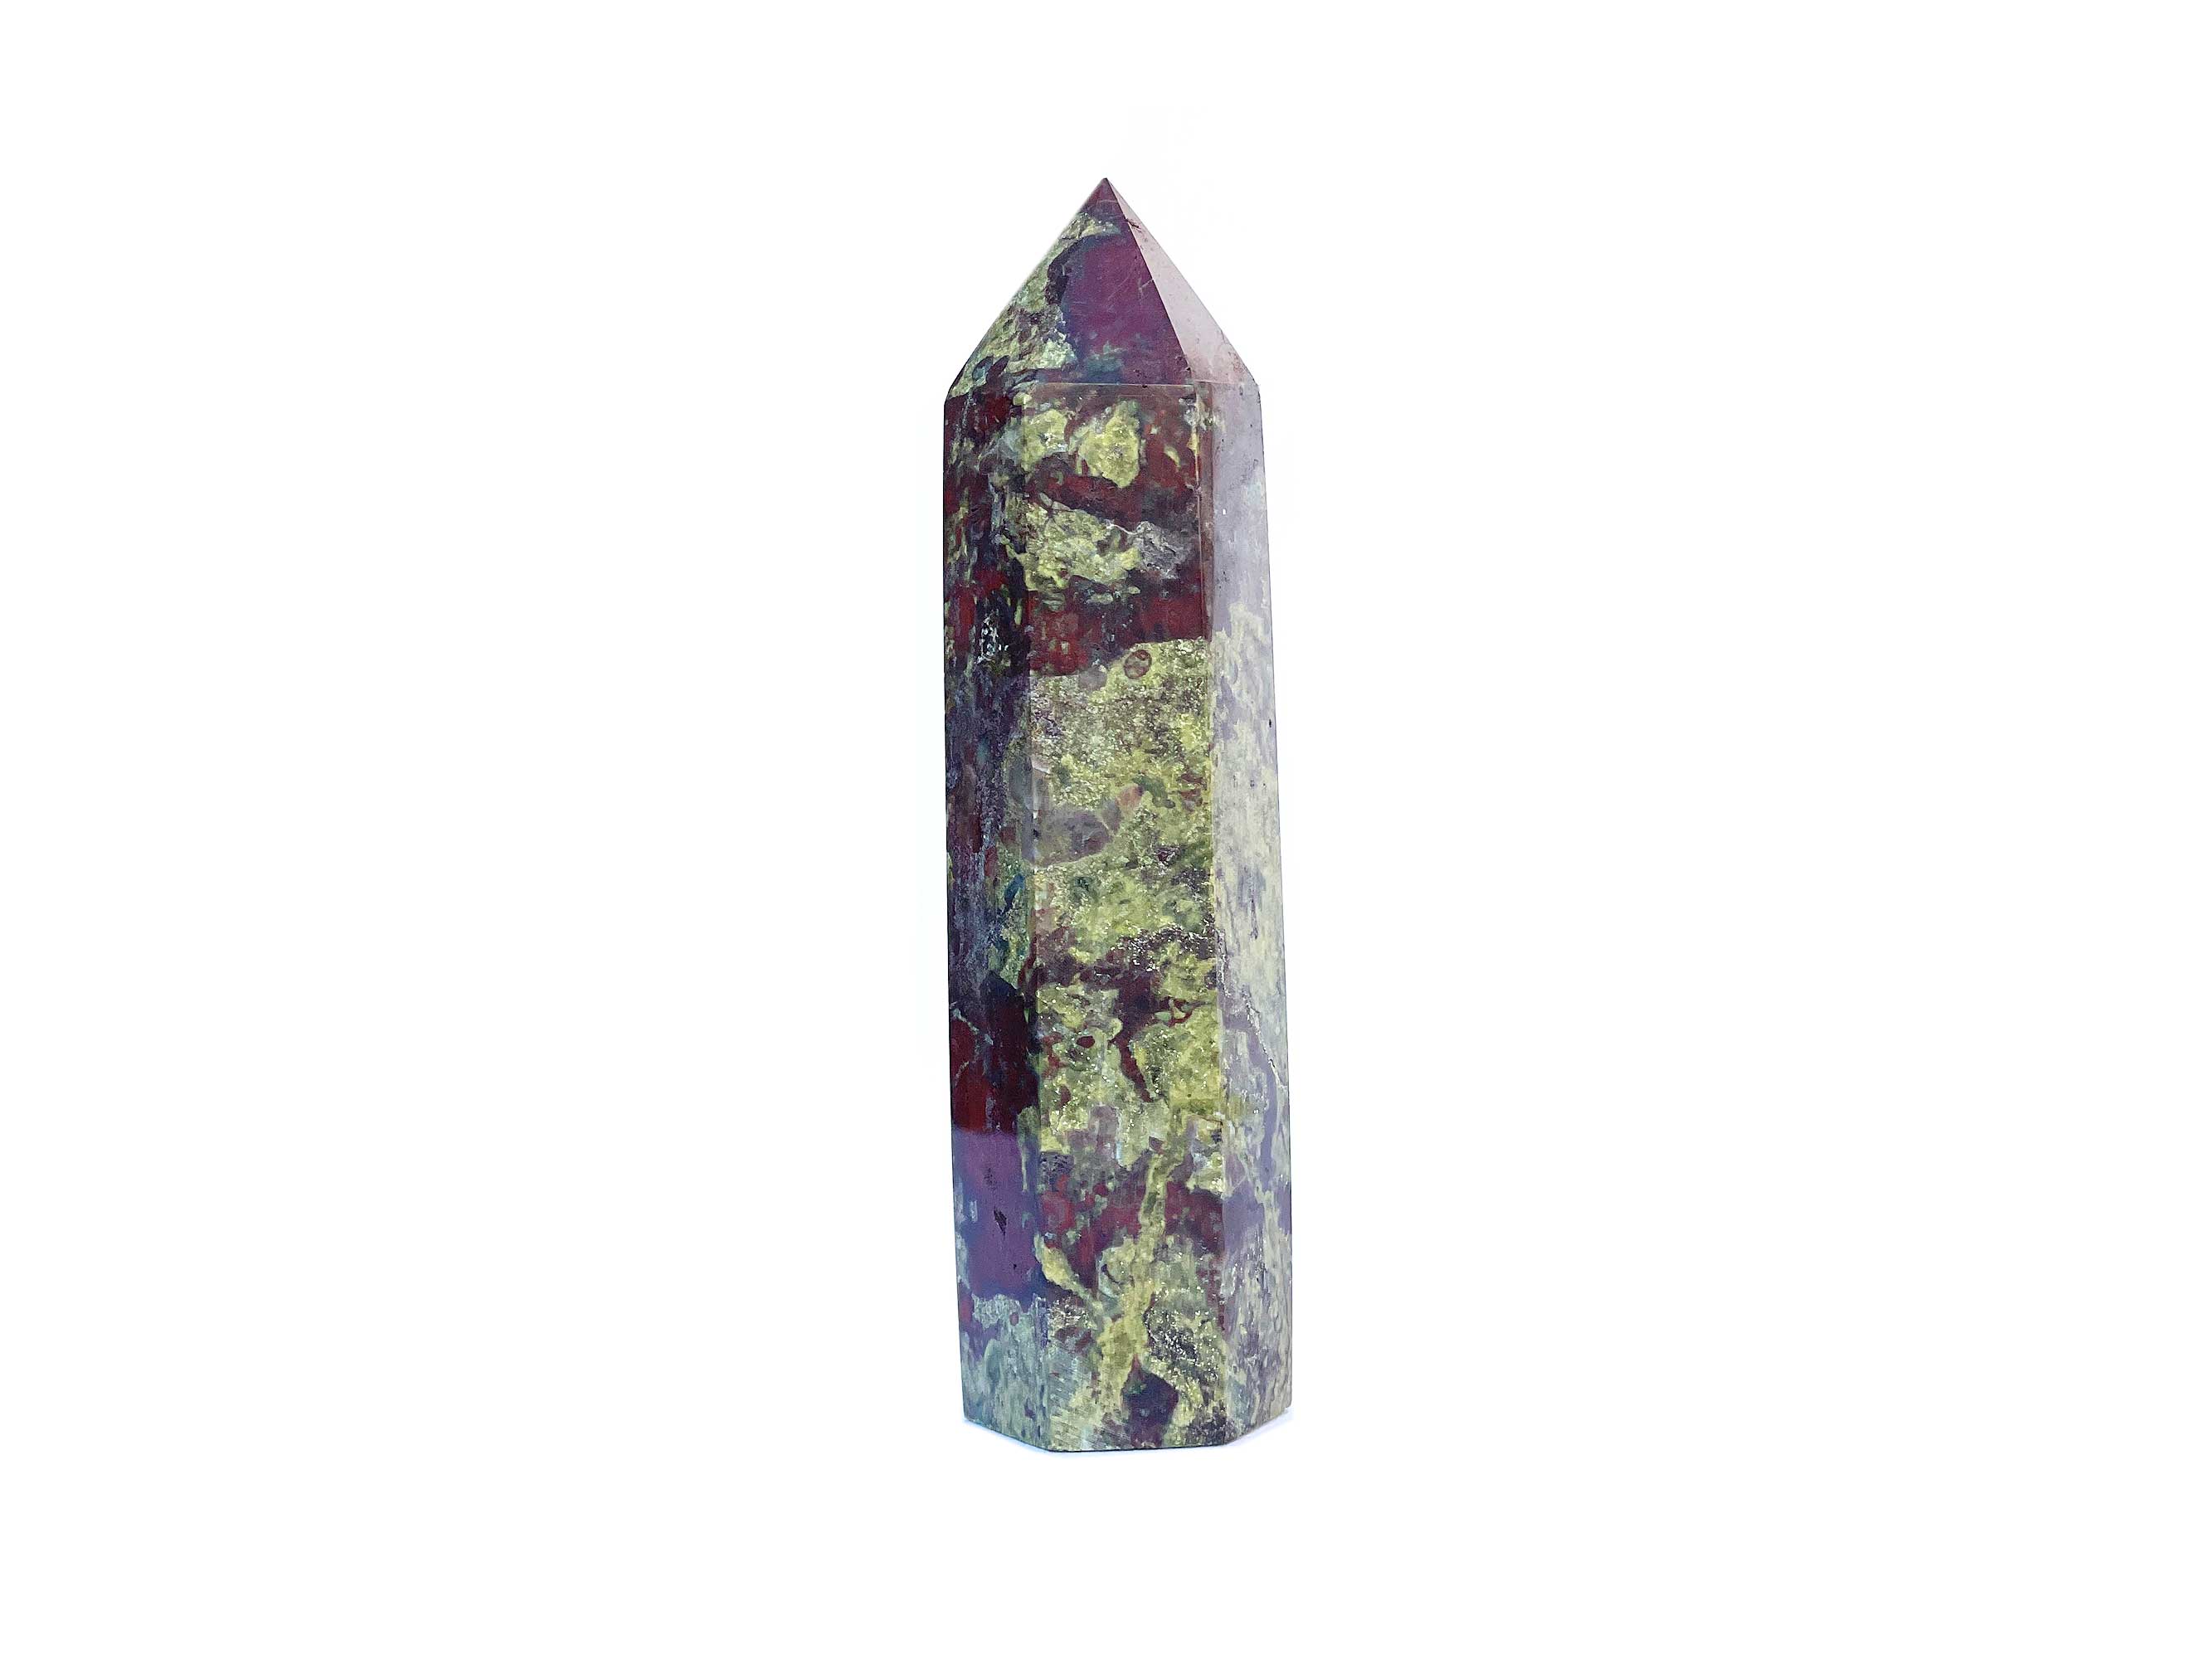 Buy Online Latest and Unique Dragon's Blood Crystal Tower Point | Shop Best Spiritual Items - The Mystical Ritual